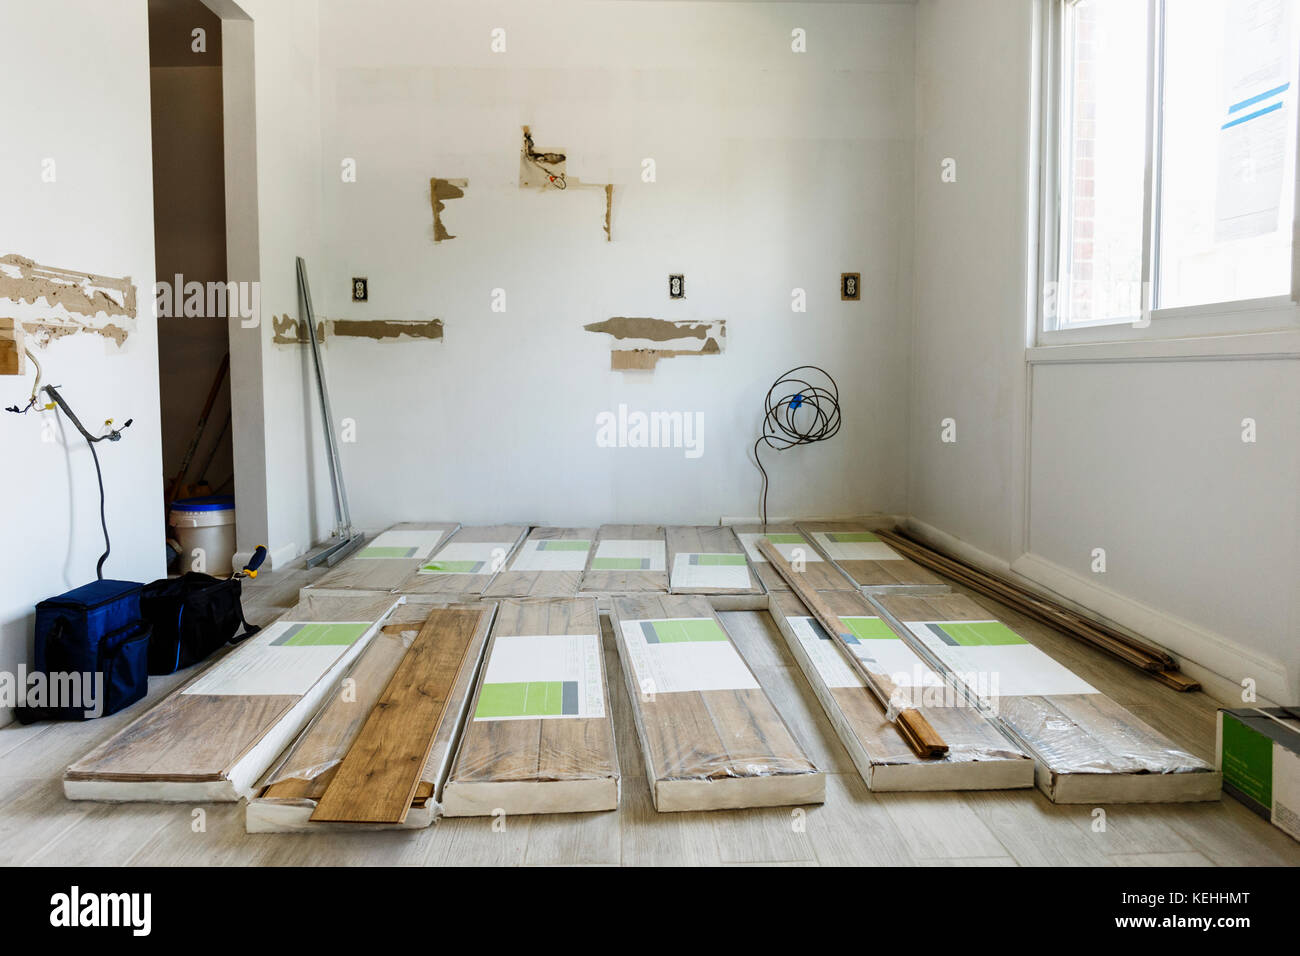 Packages of flooring on floor Stock Photo